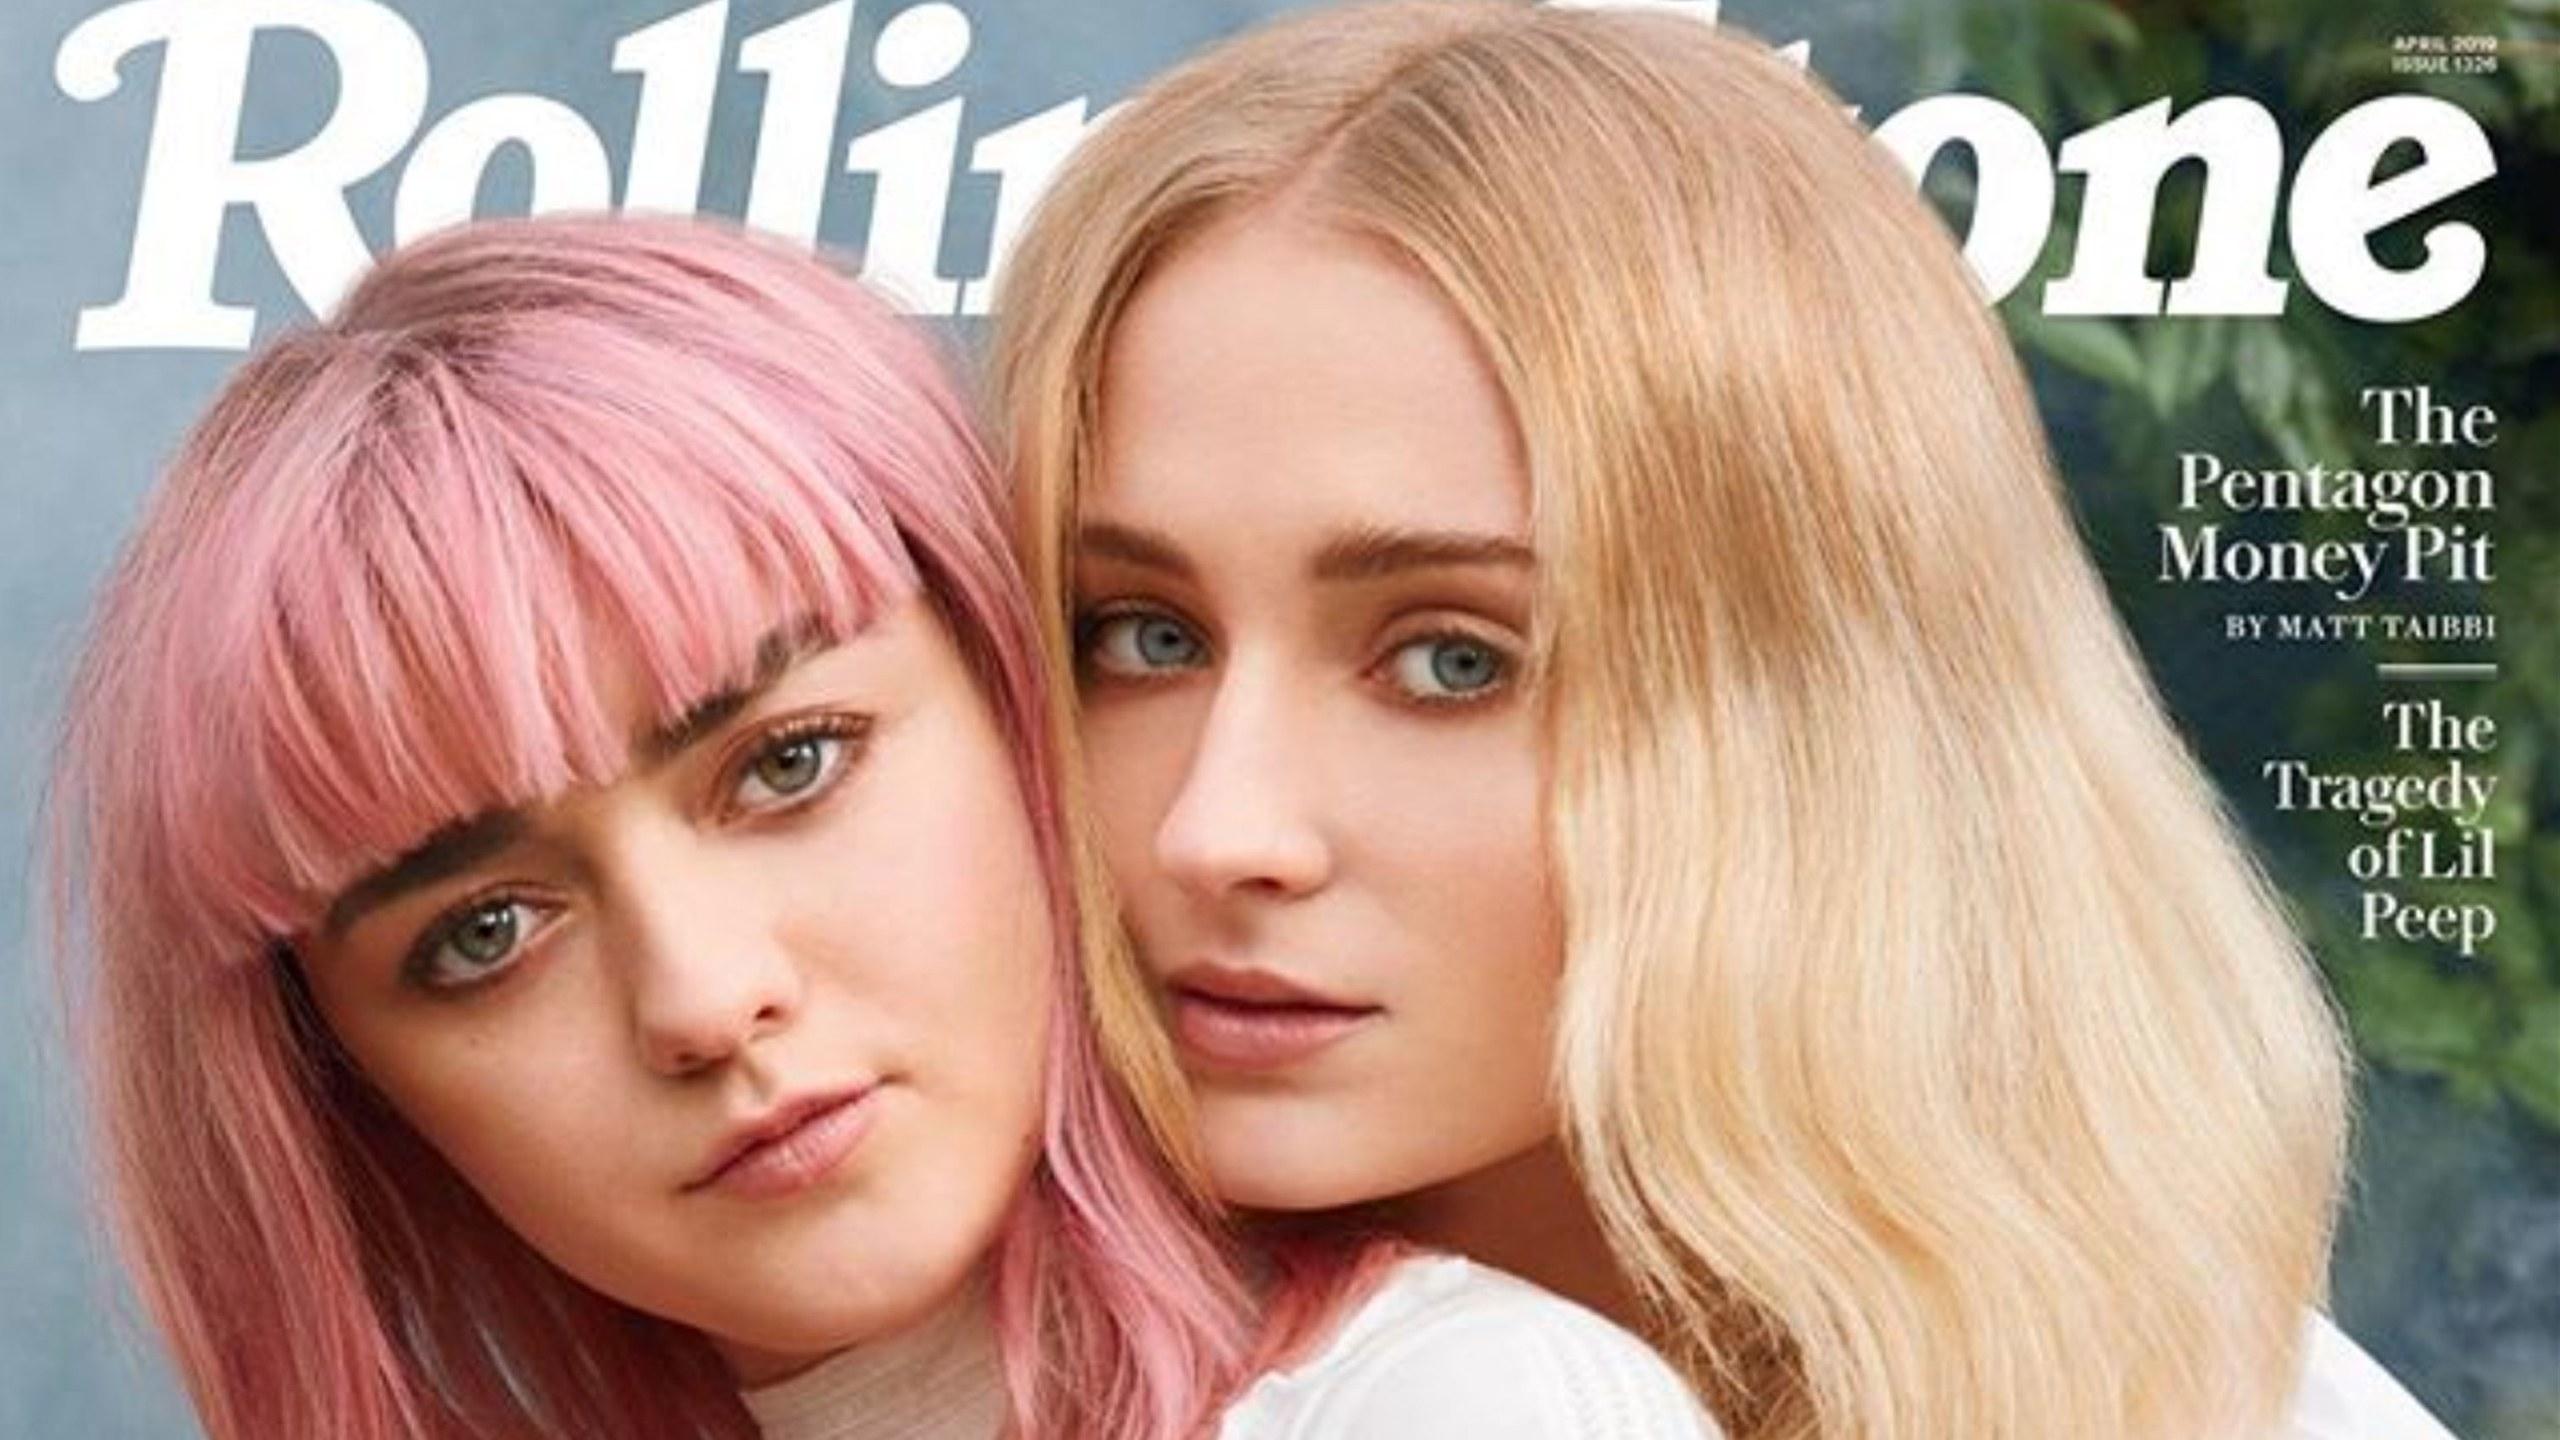 Game of Thrones” Stars Maisie Williams and Sophie Turner